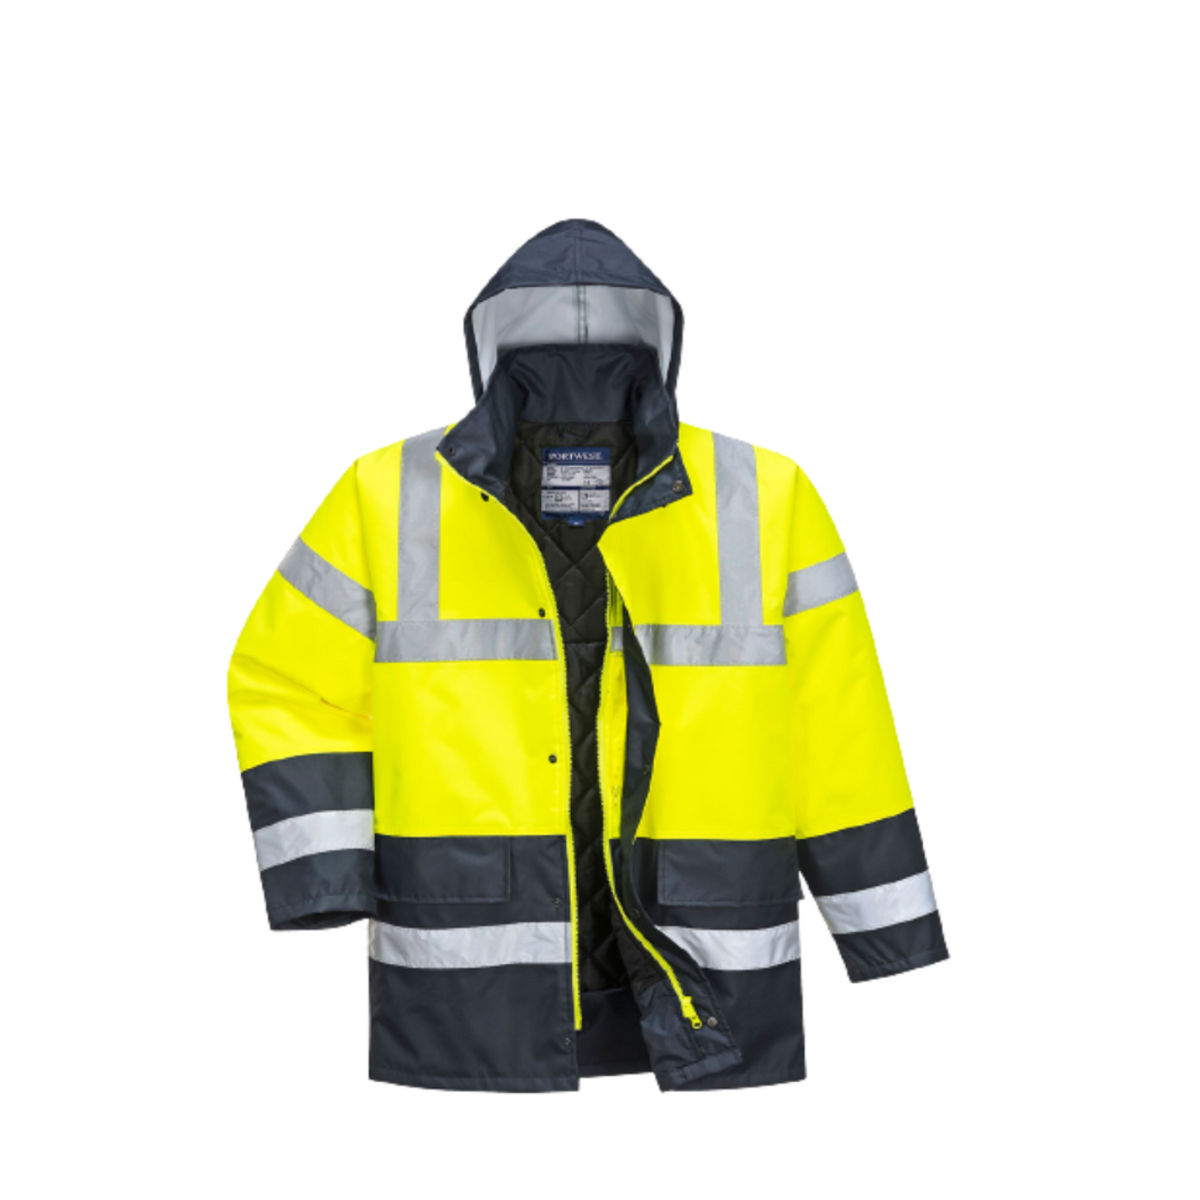 Portwest Hi-Vis Two Tone Traffic Jacket Waterproof Reflective Tape Work S466-Collins Clothing Co